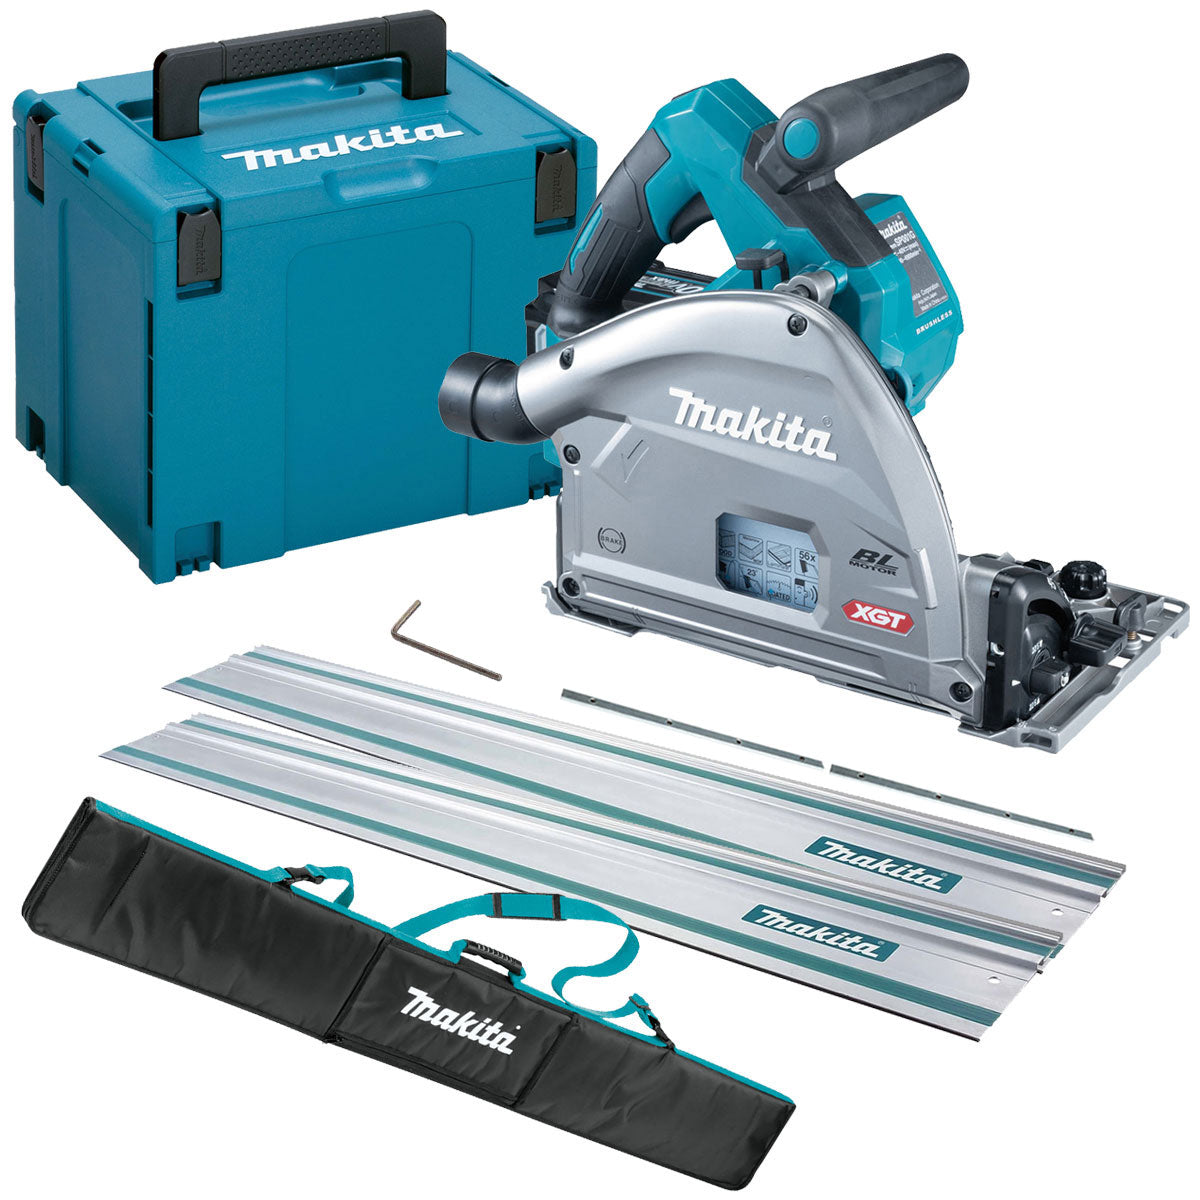 Makita SP001GZ03 40Vmax Brushless 165mm Plunge Saw with 2 x 1.5m Guide Rail & Case + Rail Bag